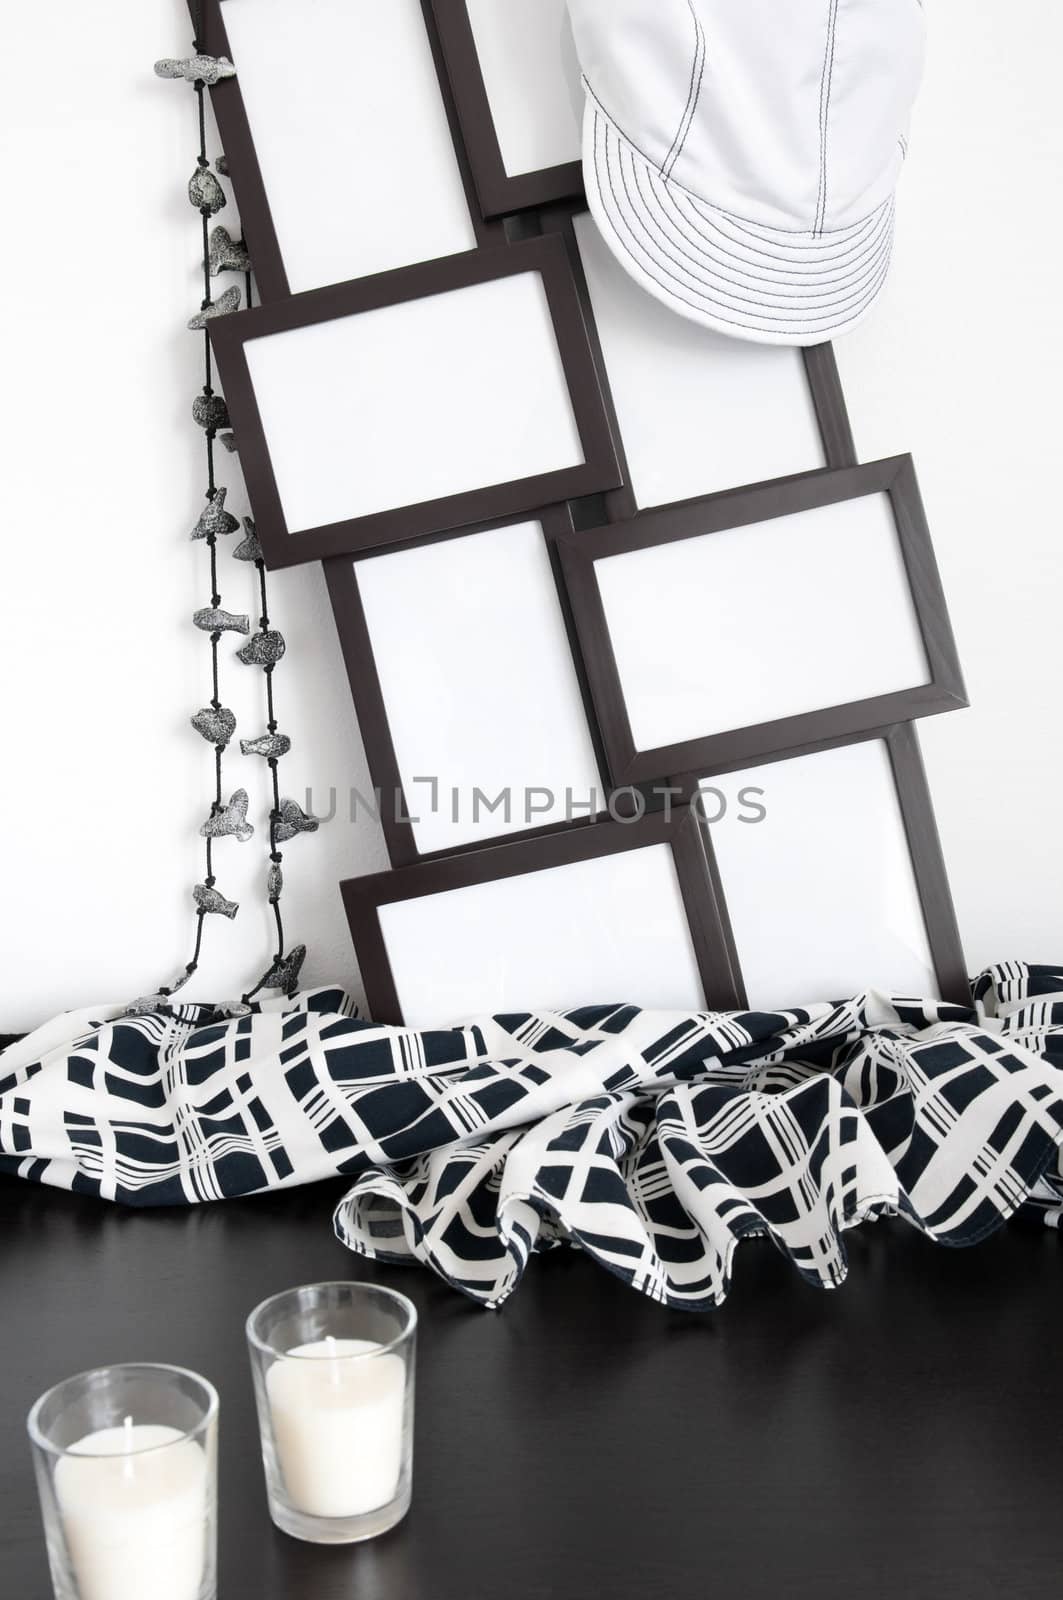 Black and white decor: photo frames, clothing and candles.